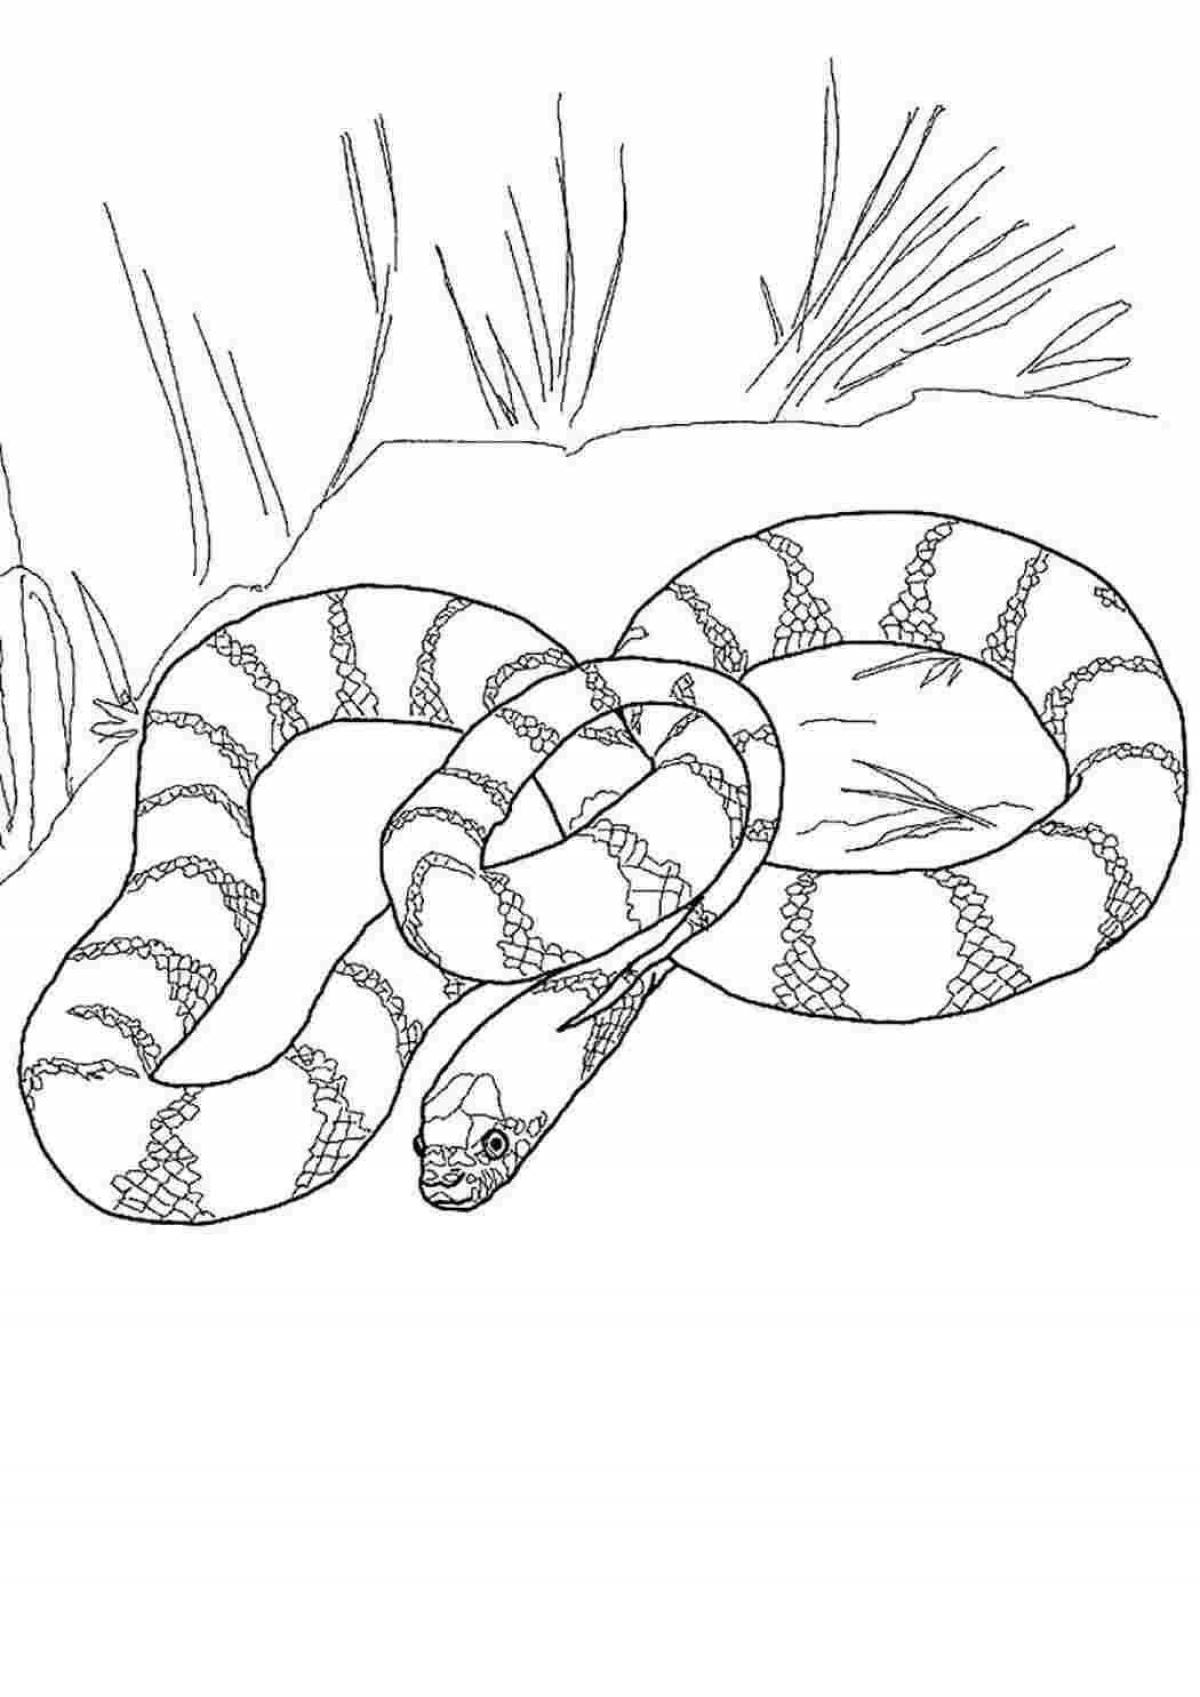 Coloring majestic blue snake